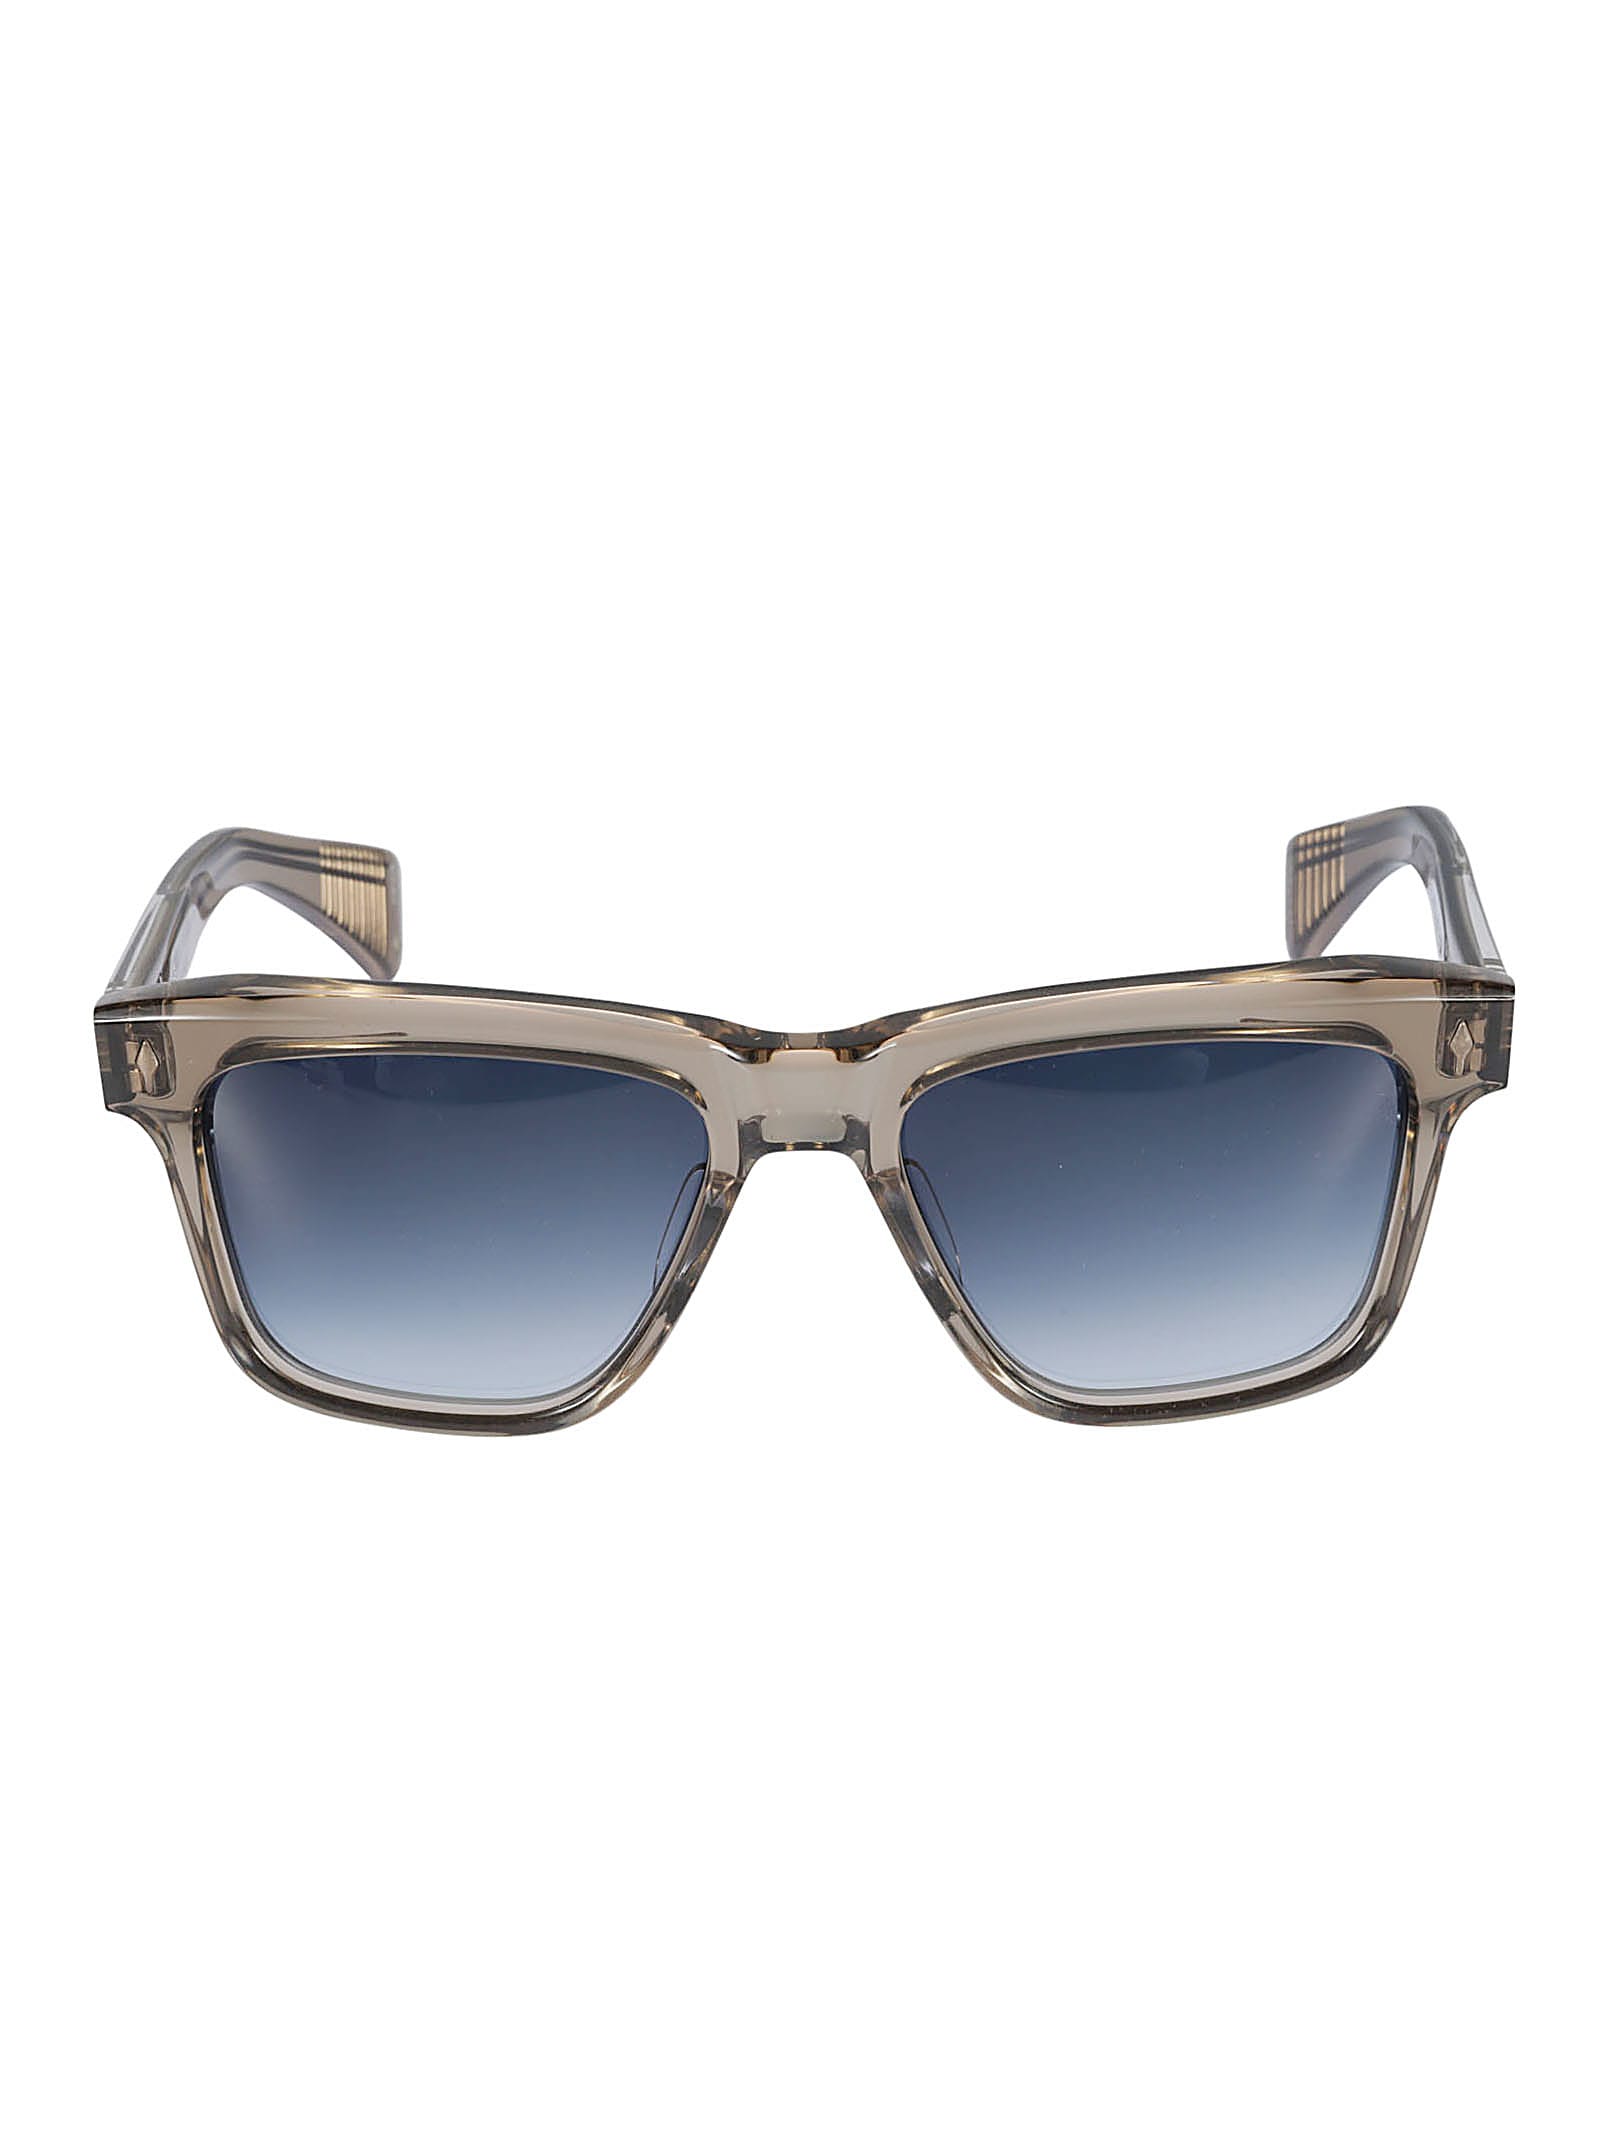 Jacques Marie Mage Lankaster Sunglasses